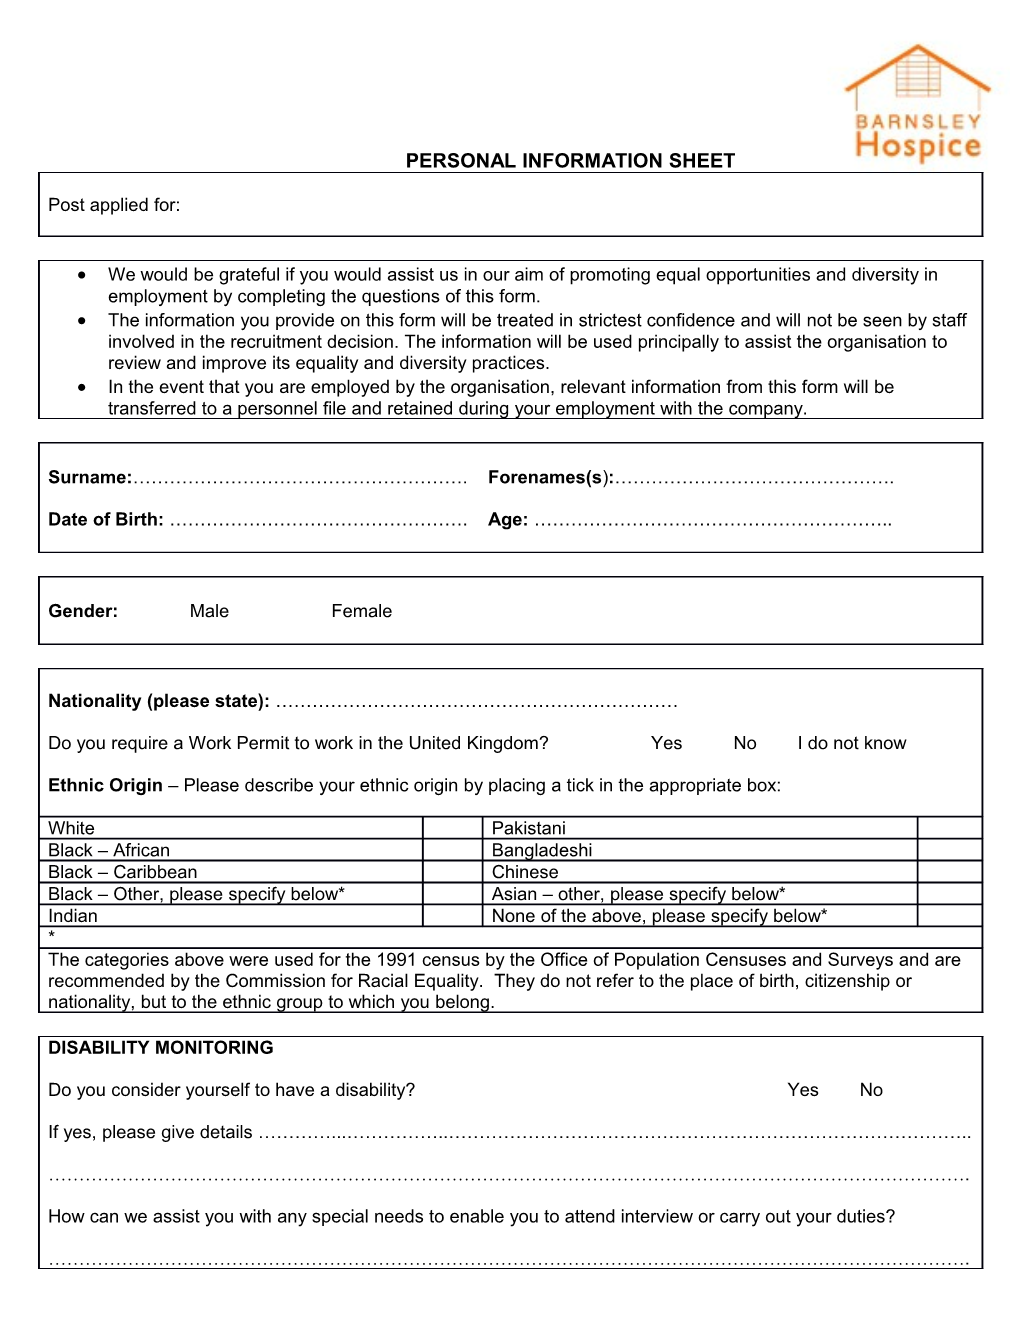 Personal Information Sheet s1